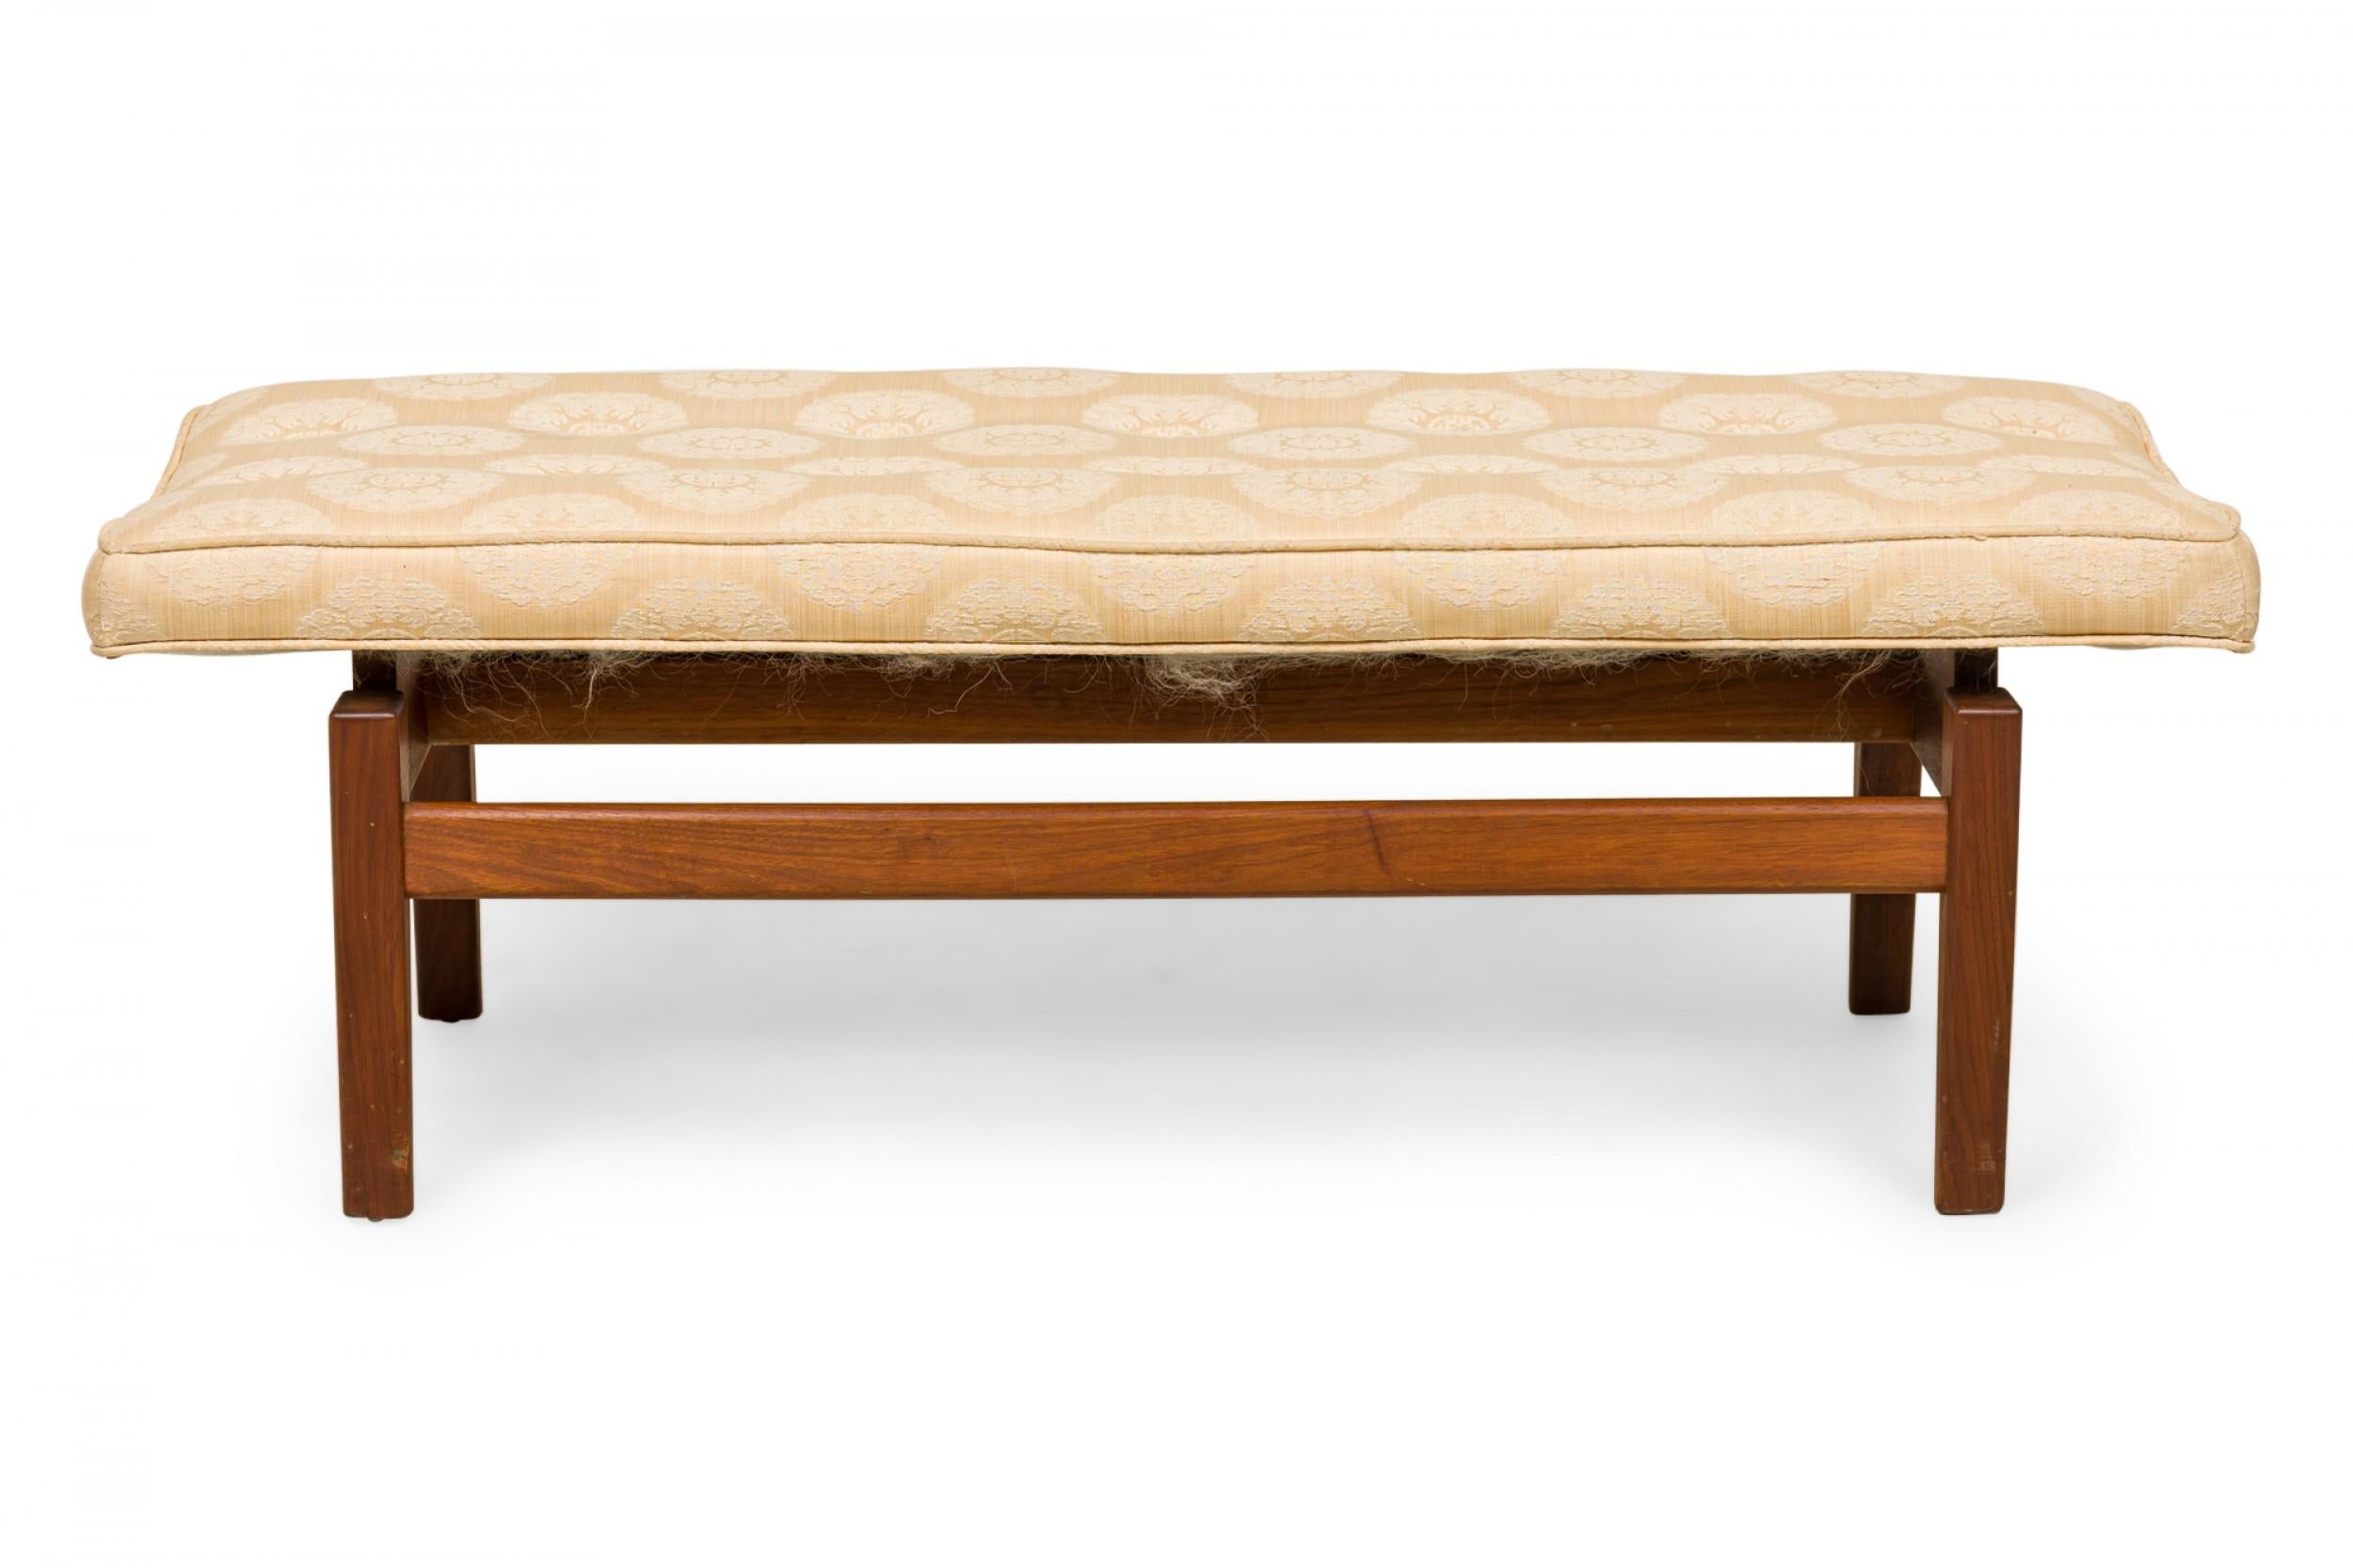 Danish Mid-Century rectangular floating bench with an off-white Shou-patterned fabric upholstered seat resting on a wooden floating frame base. (JENS RISOM).
 